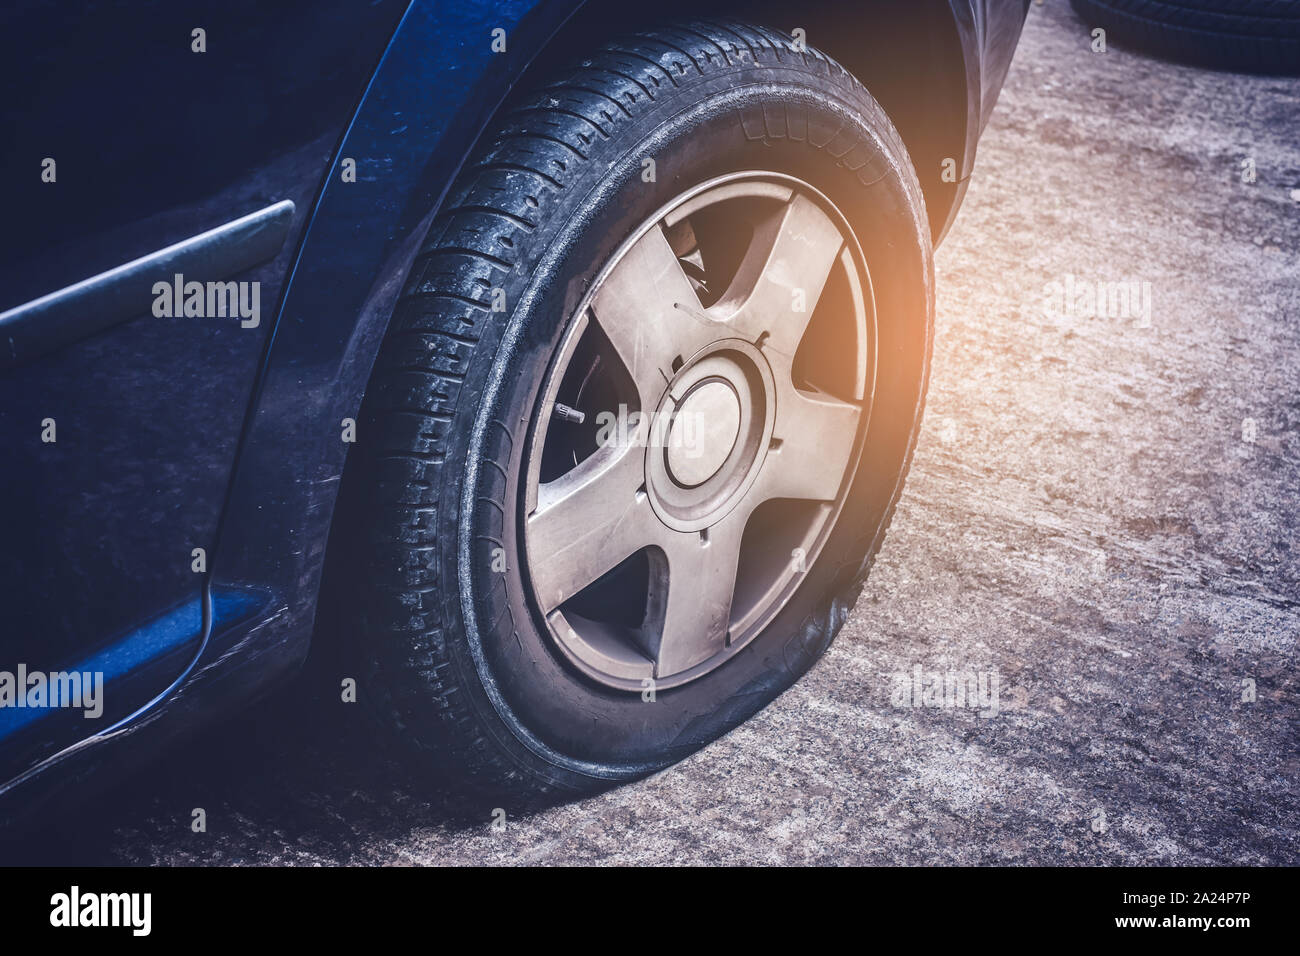 Close up of flat rear tire of a car punctured by screw Stock Photo